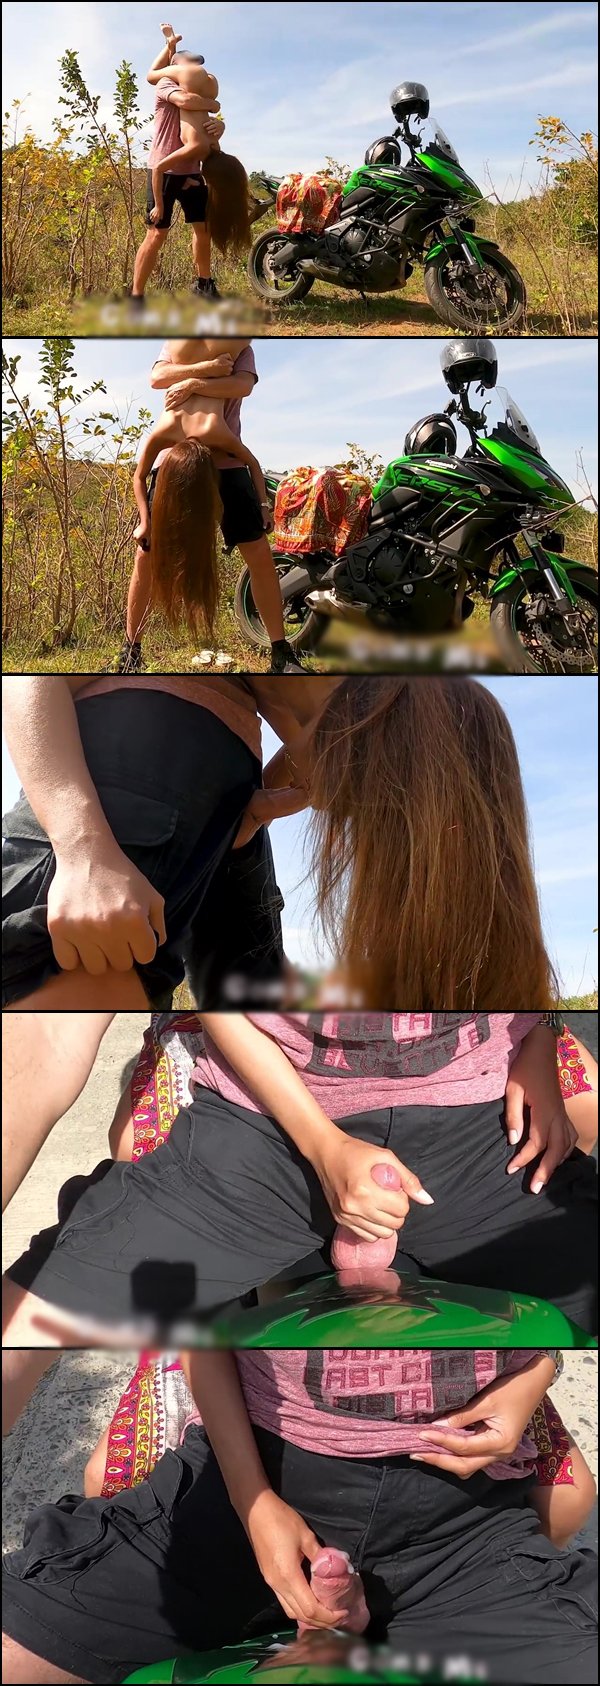 Teen Squirt While Riding